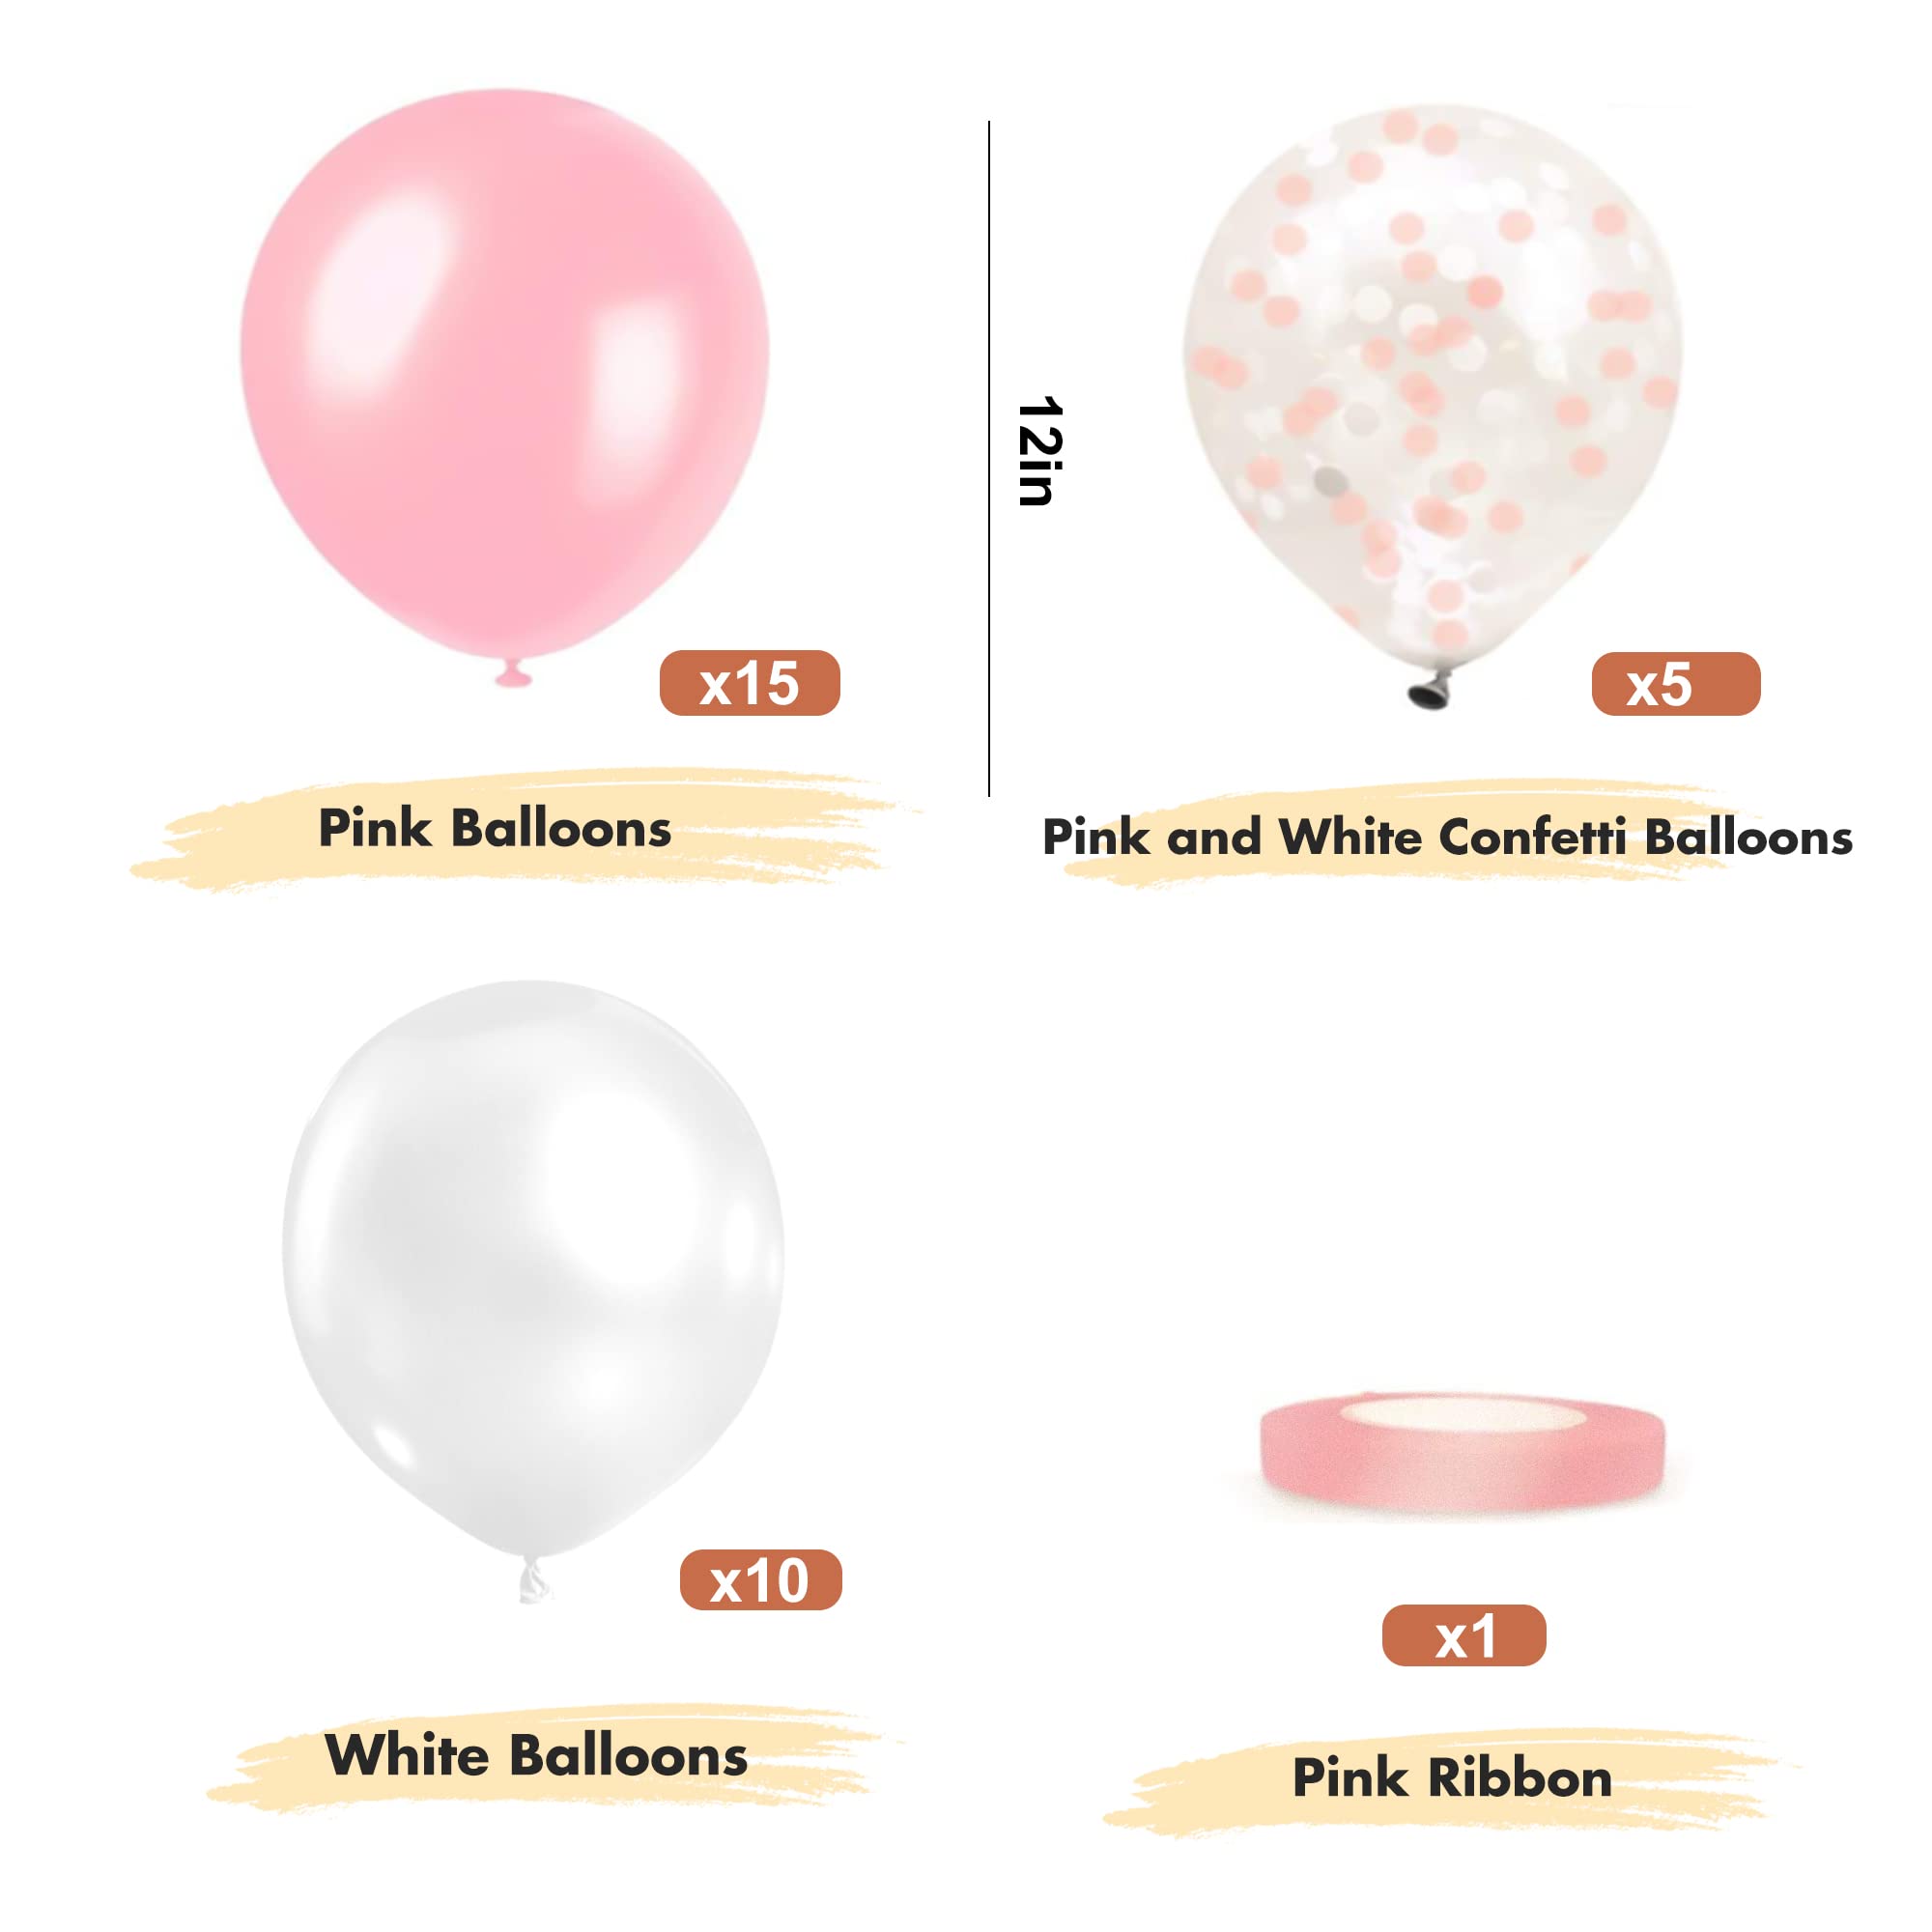 OHugs Pink Balloons - 31 Pcs Set of 12 Inch 15 Pink Balloons, 10 White Balloons, 5 Pink and White Confetti Balloons, 1 Ribbon for Bridal Shower, Baby Shower, Birthday Party, Gender Reveal, Wedding